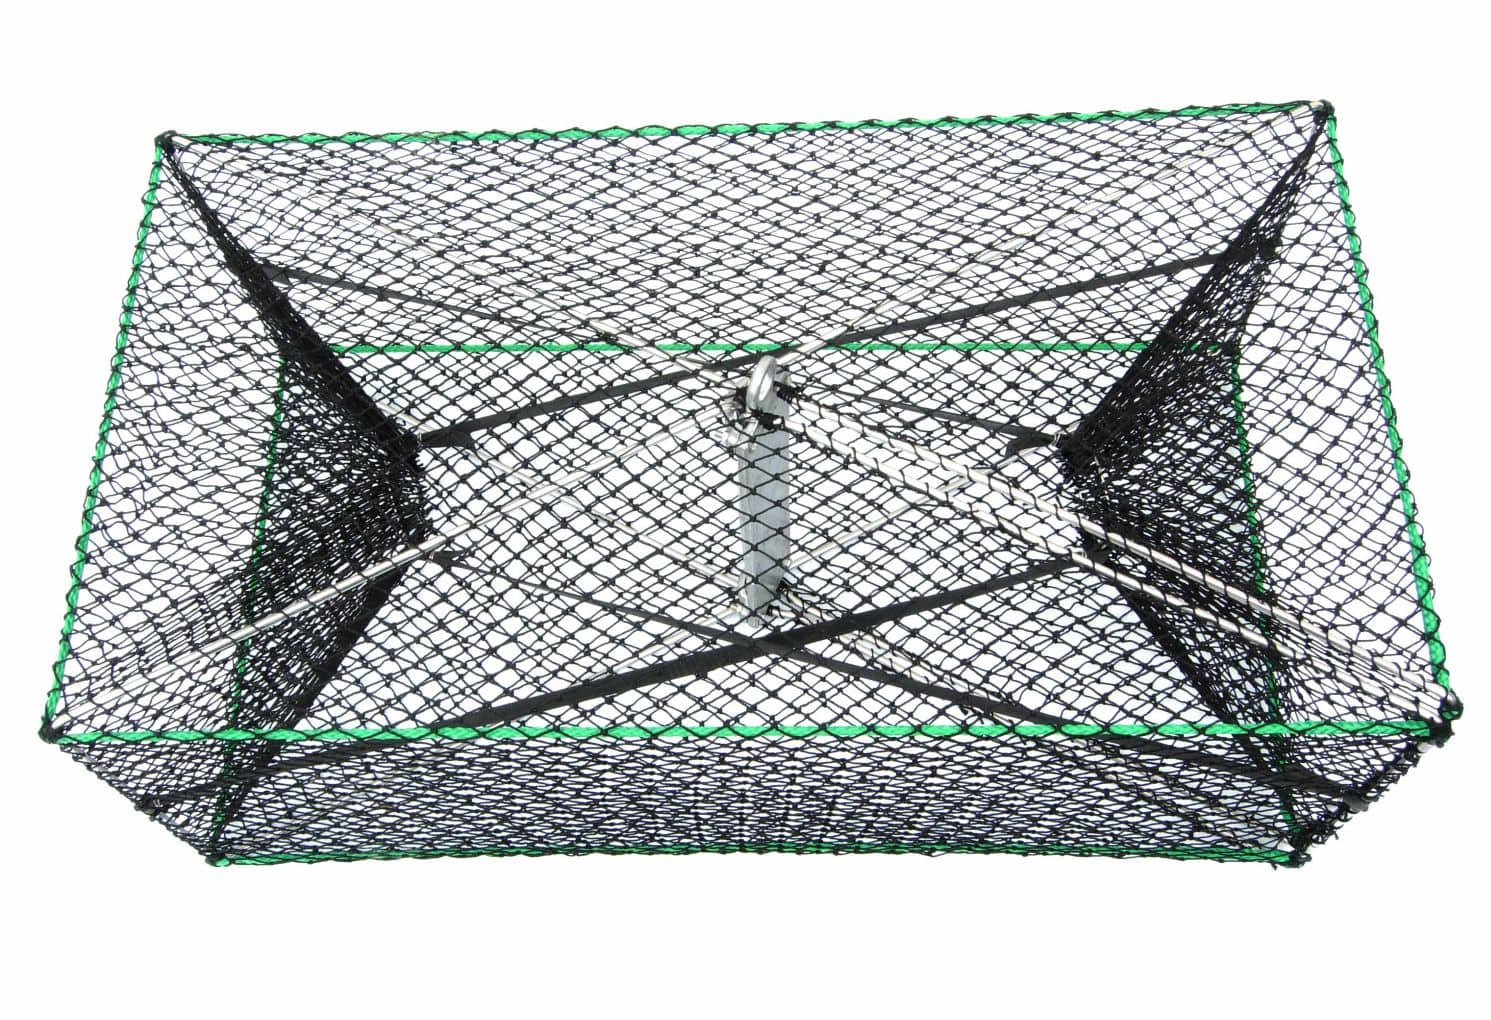 Sea King Stainless Steel Folding Prawn Trap, Collapsible with 3 Openings